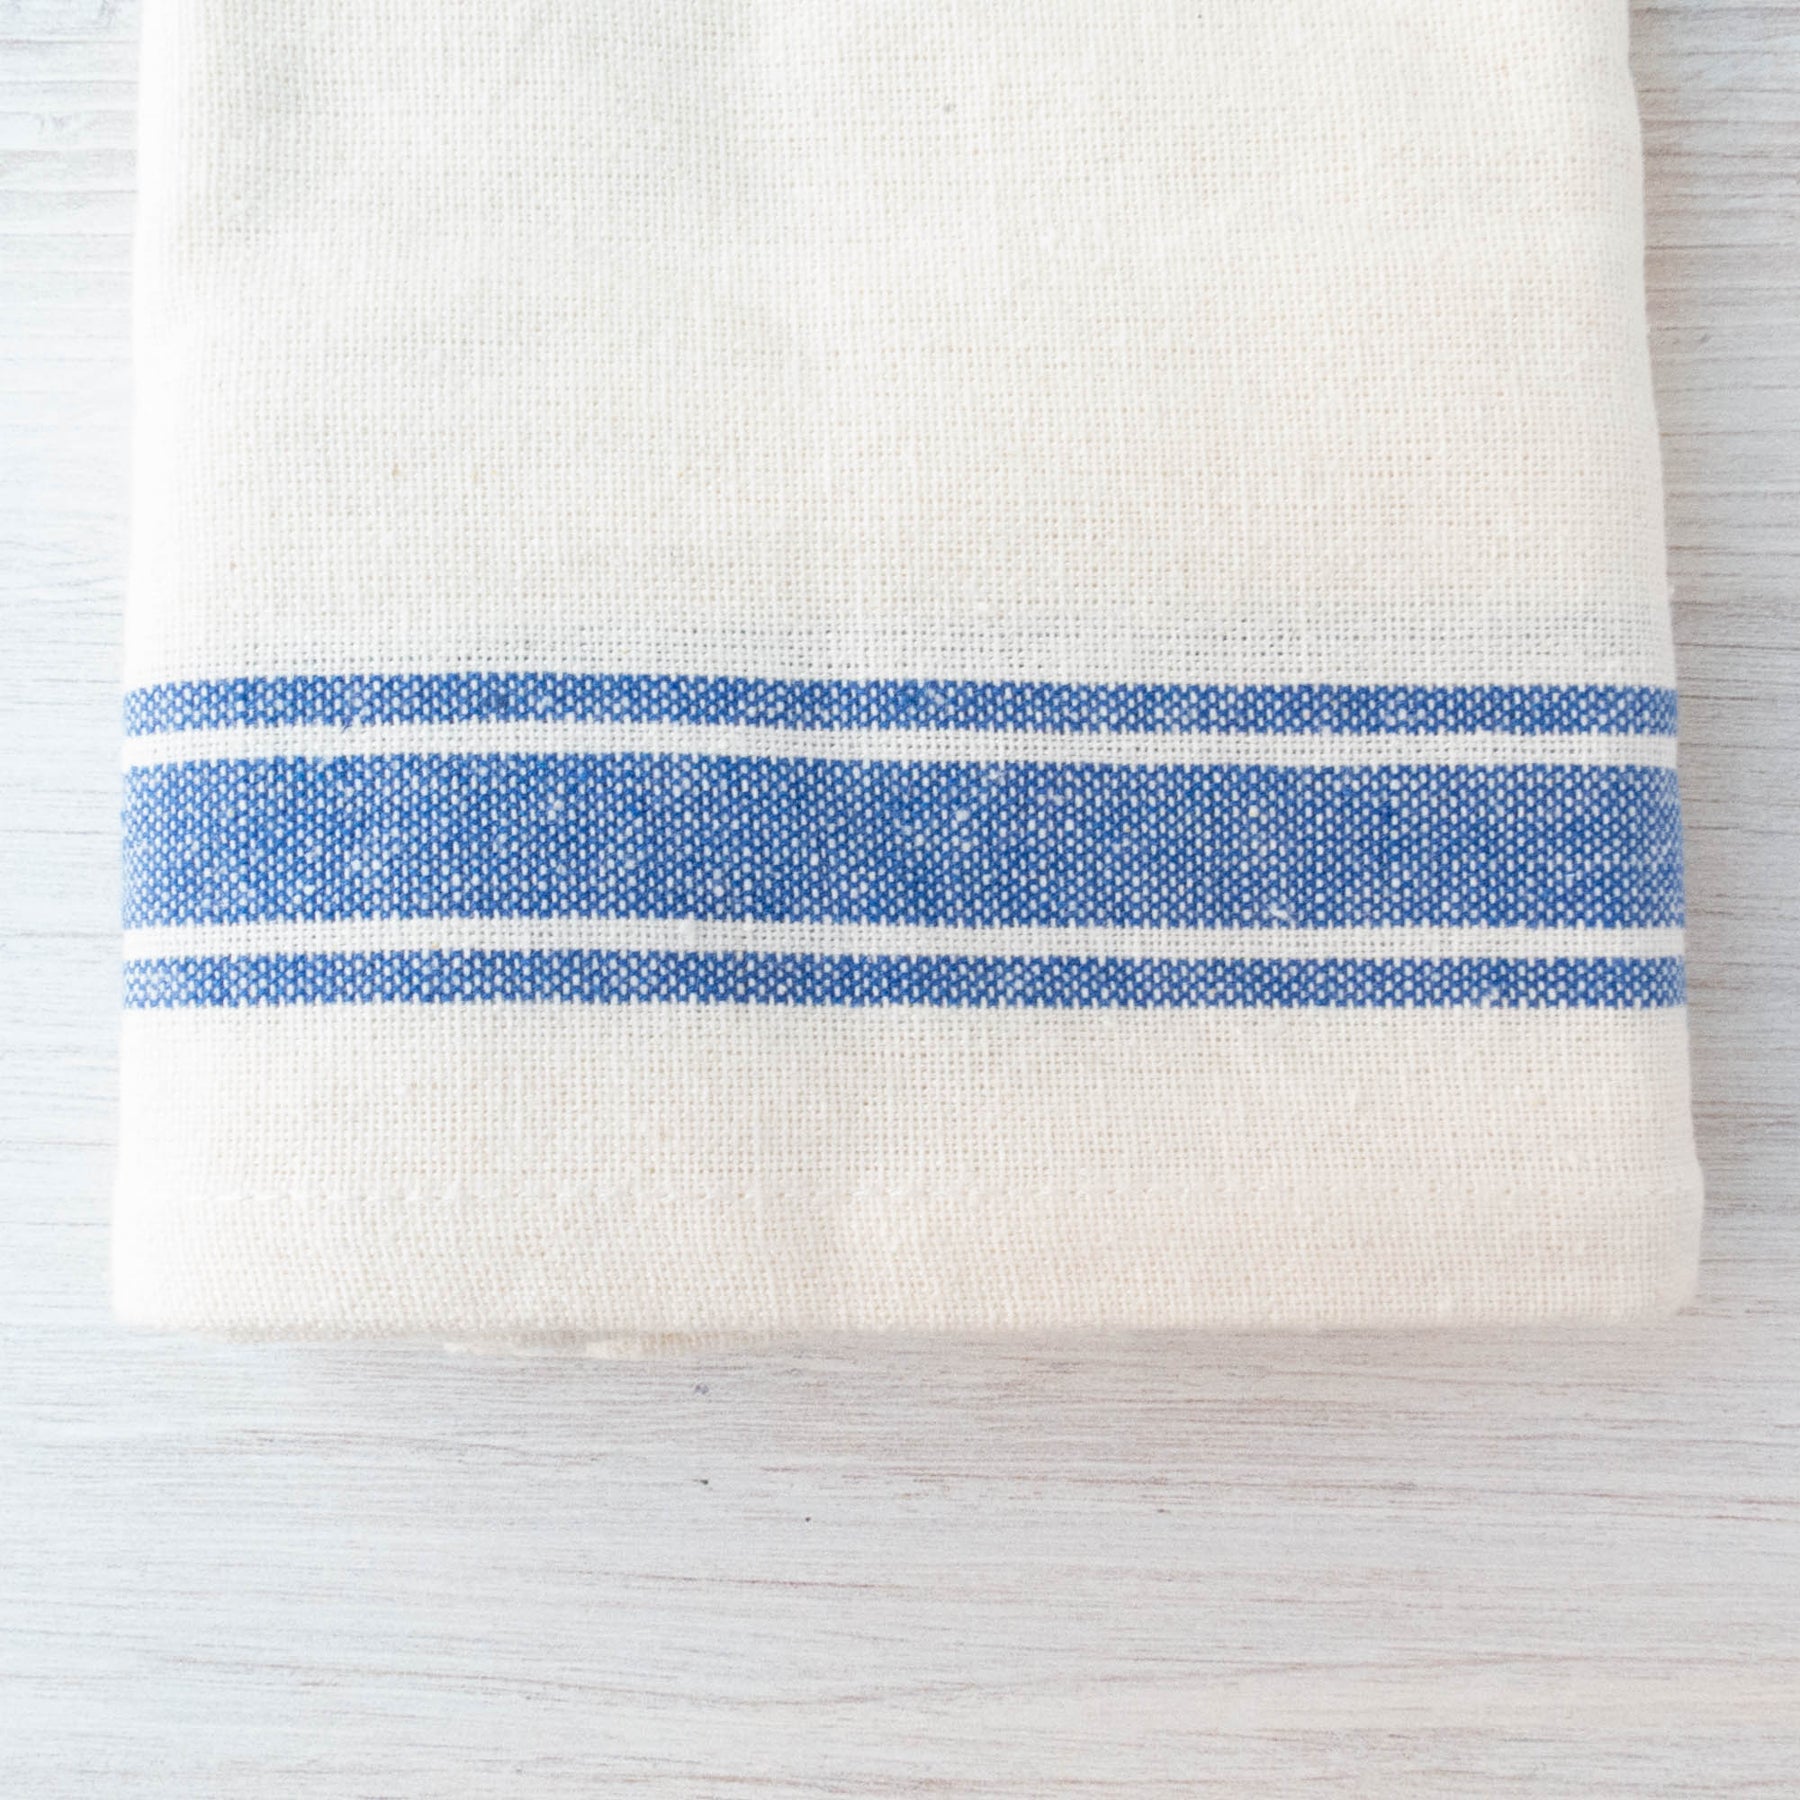 Embroidered Dish Towel with Delft Blue Sprig - Farmhouse Wares